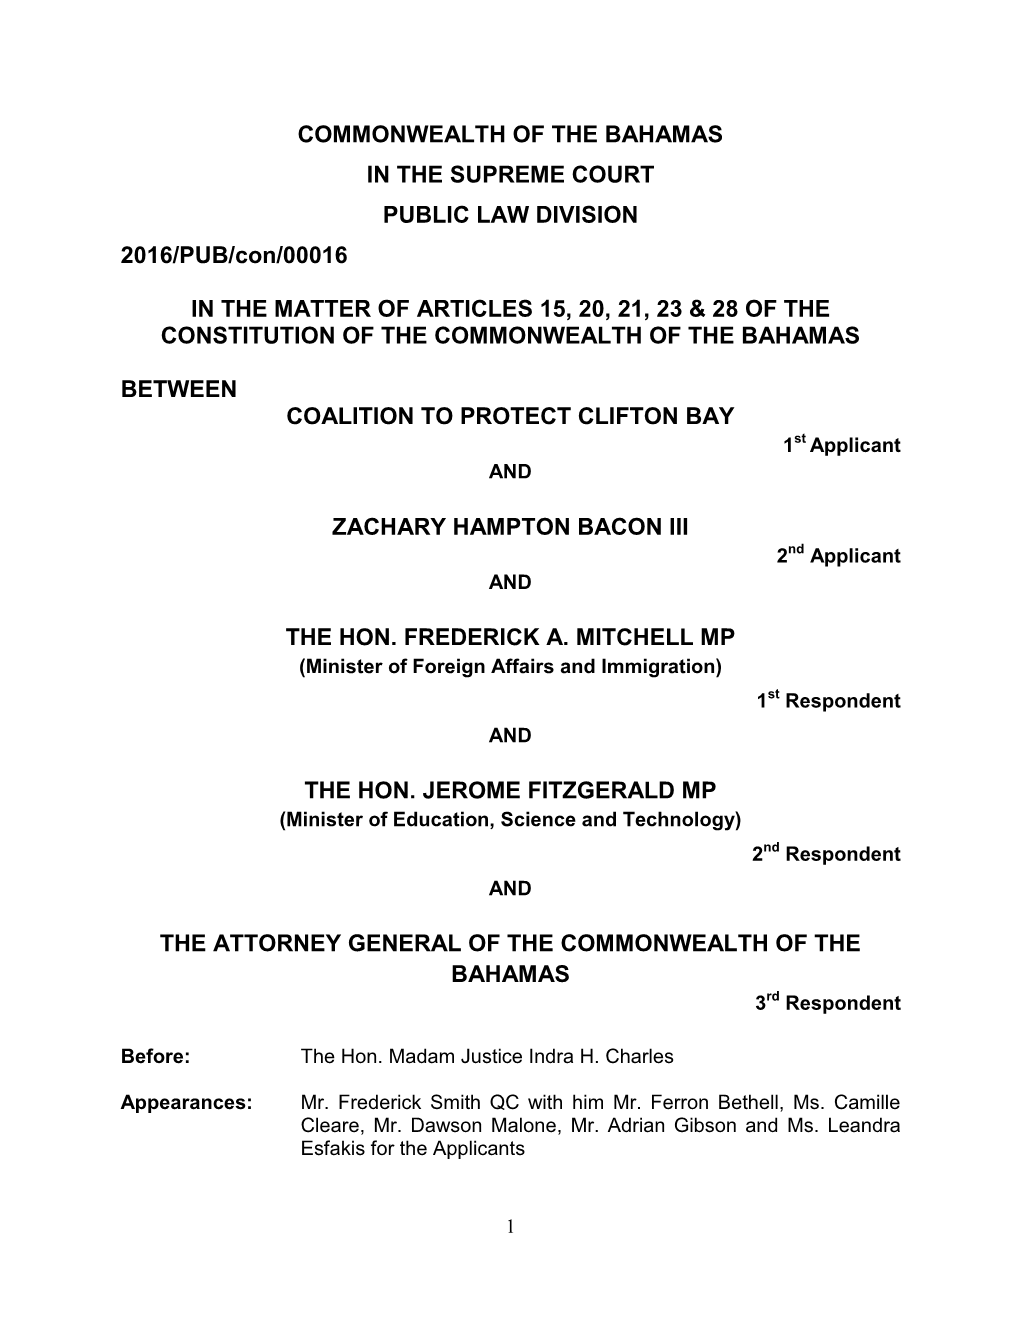 COMMONWEALTH of the BAHAMAS in the SUPREME COURT PUBLIC LAW DIVISION 2016/PUB/Con/00016